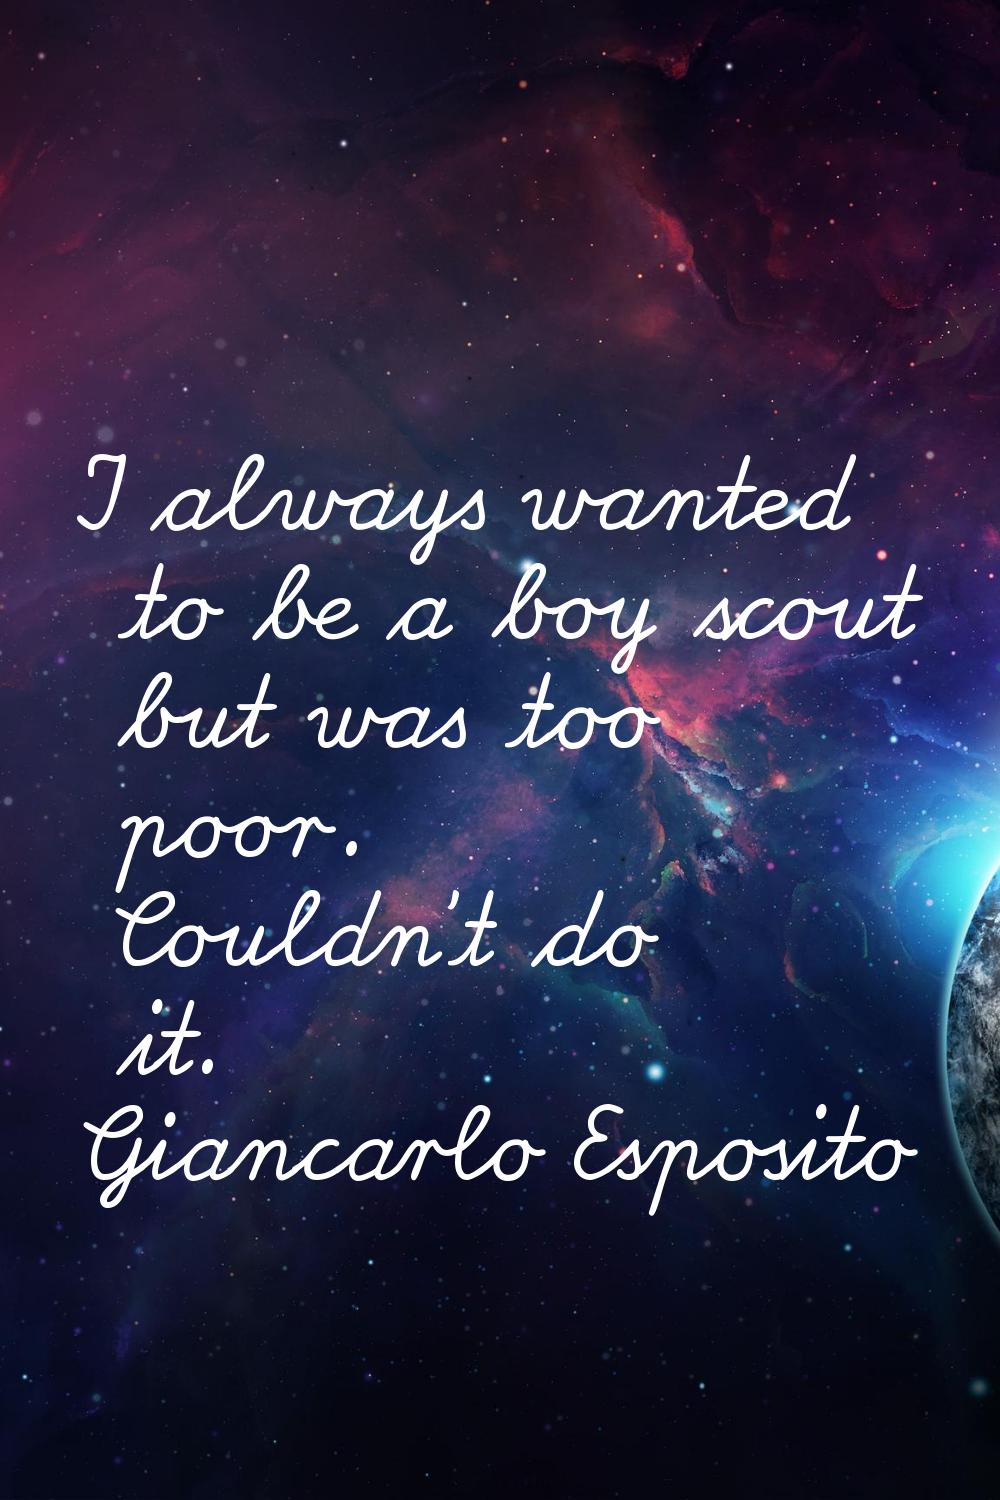 I always wanted to be a boy scout but was too poor. Couldn't do it.